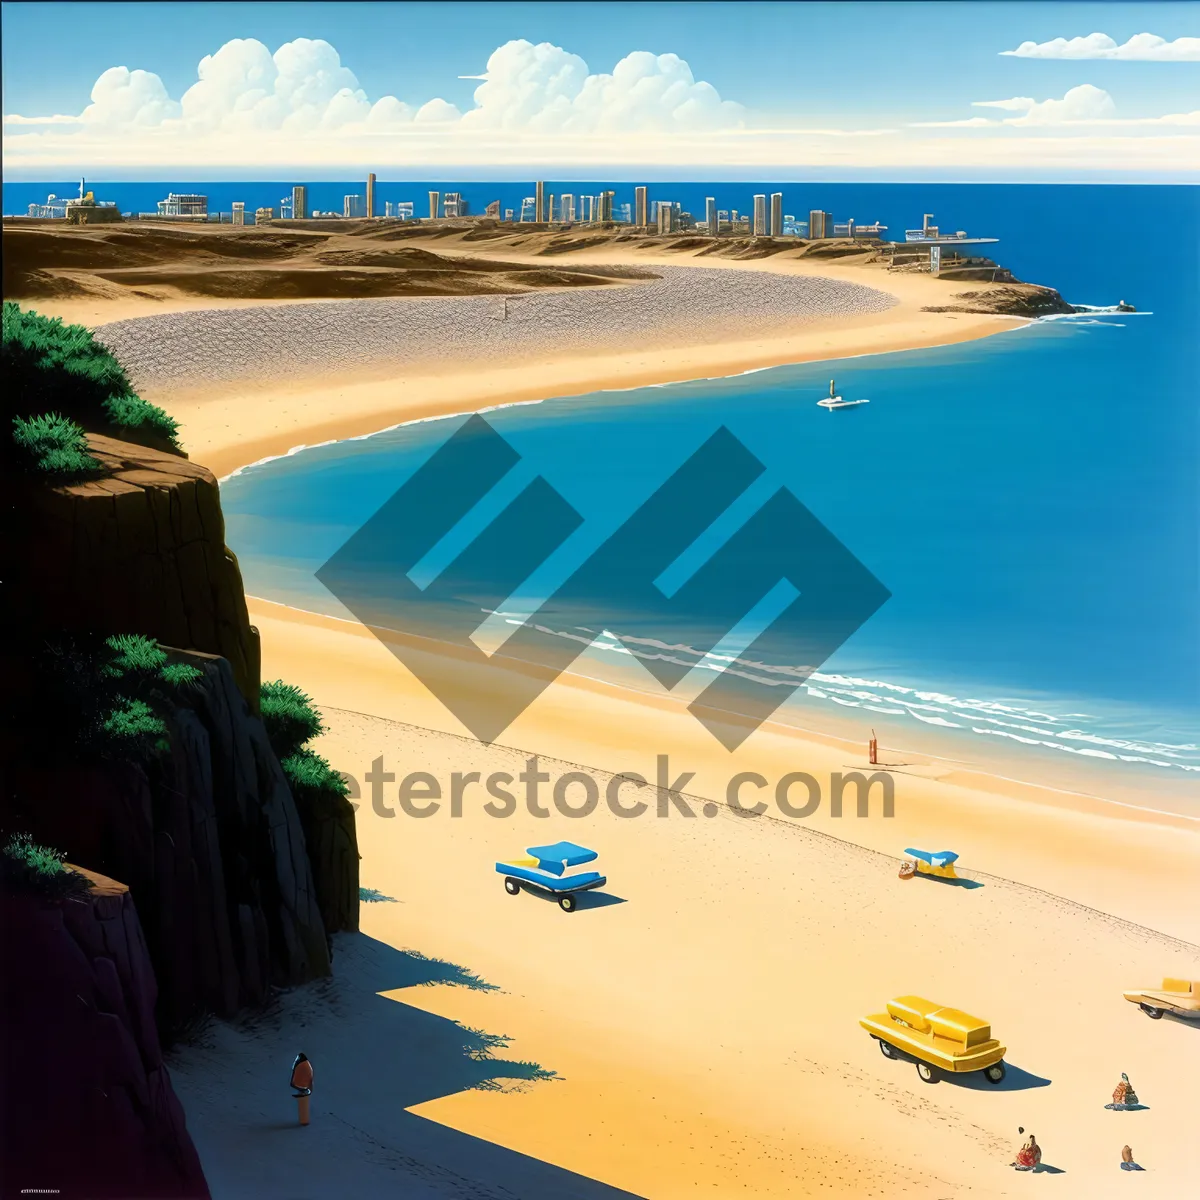 Picture of Turquoise Waters and Sandy Shoreline at Tropical Beach